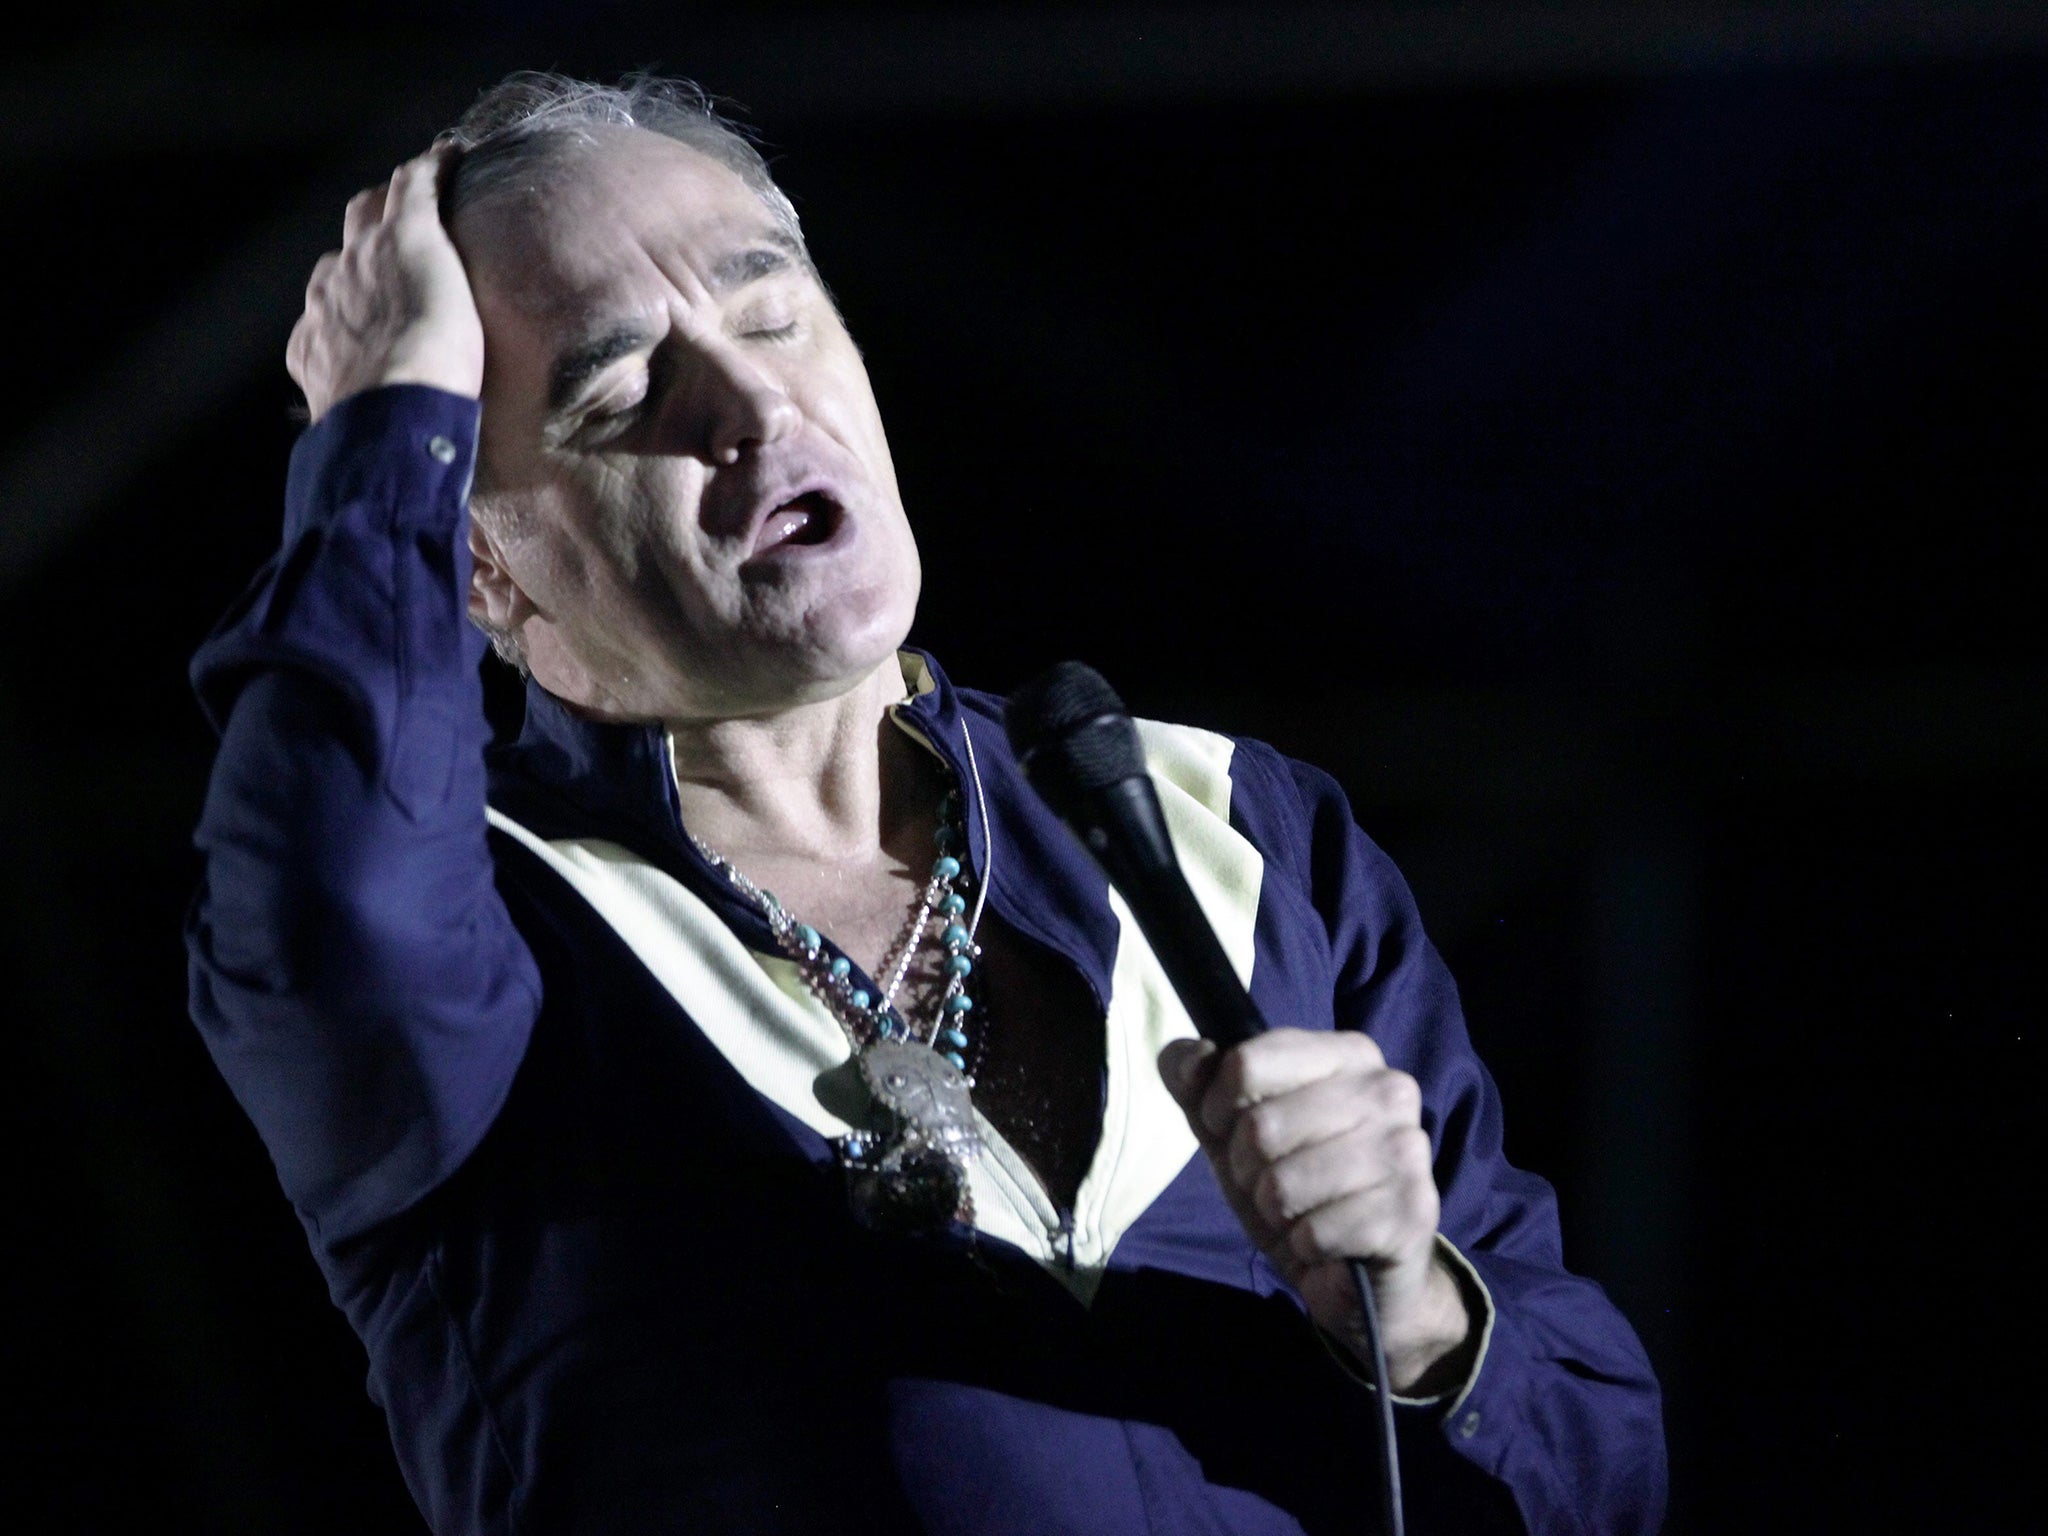 Morrissey first released 'I'm Throwing My Arms Around Paris' in 2009